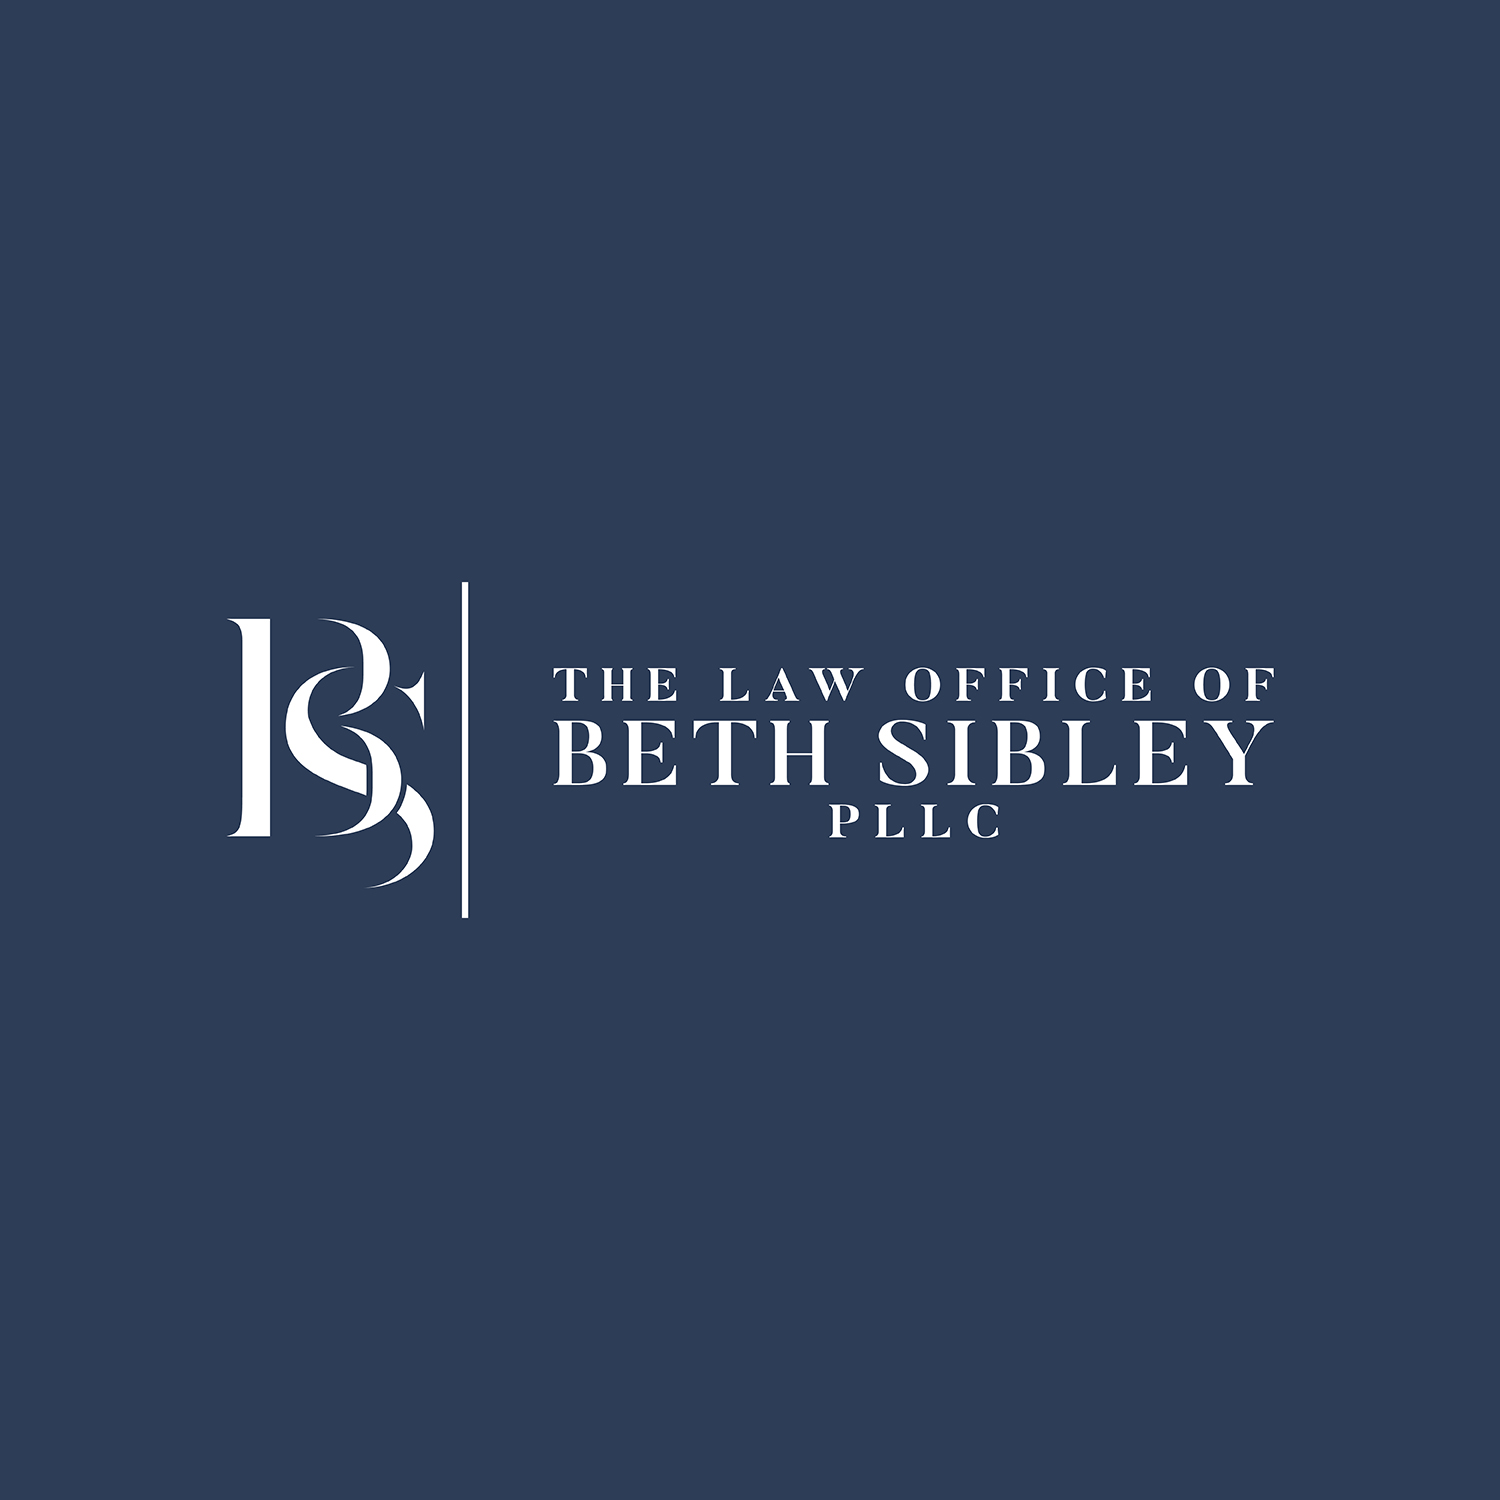 Raleigh Logo Designer Law Firm The Law Office Of Beth Sibley